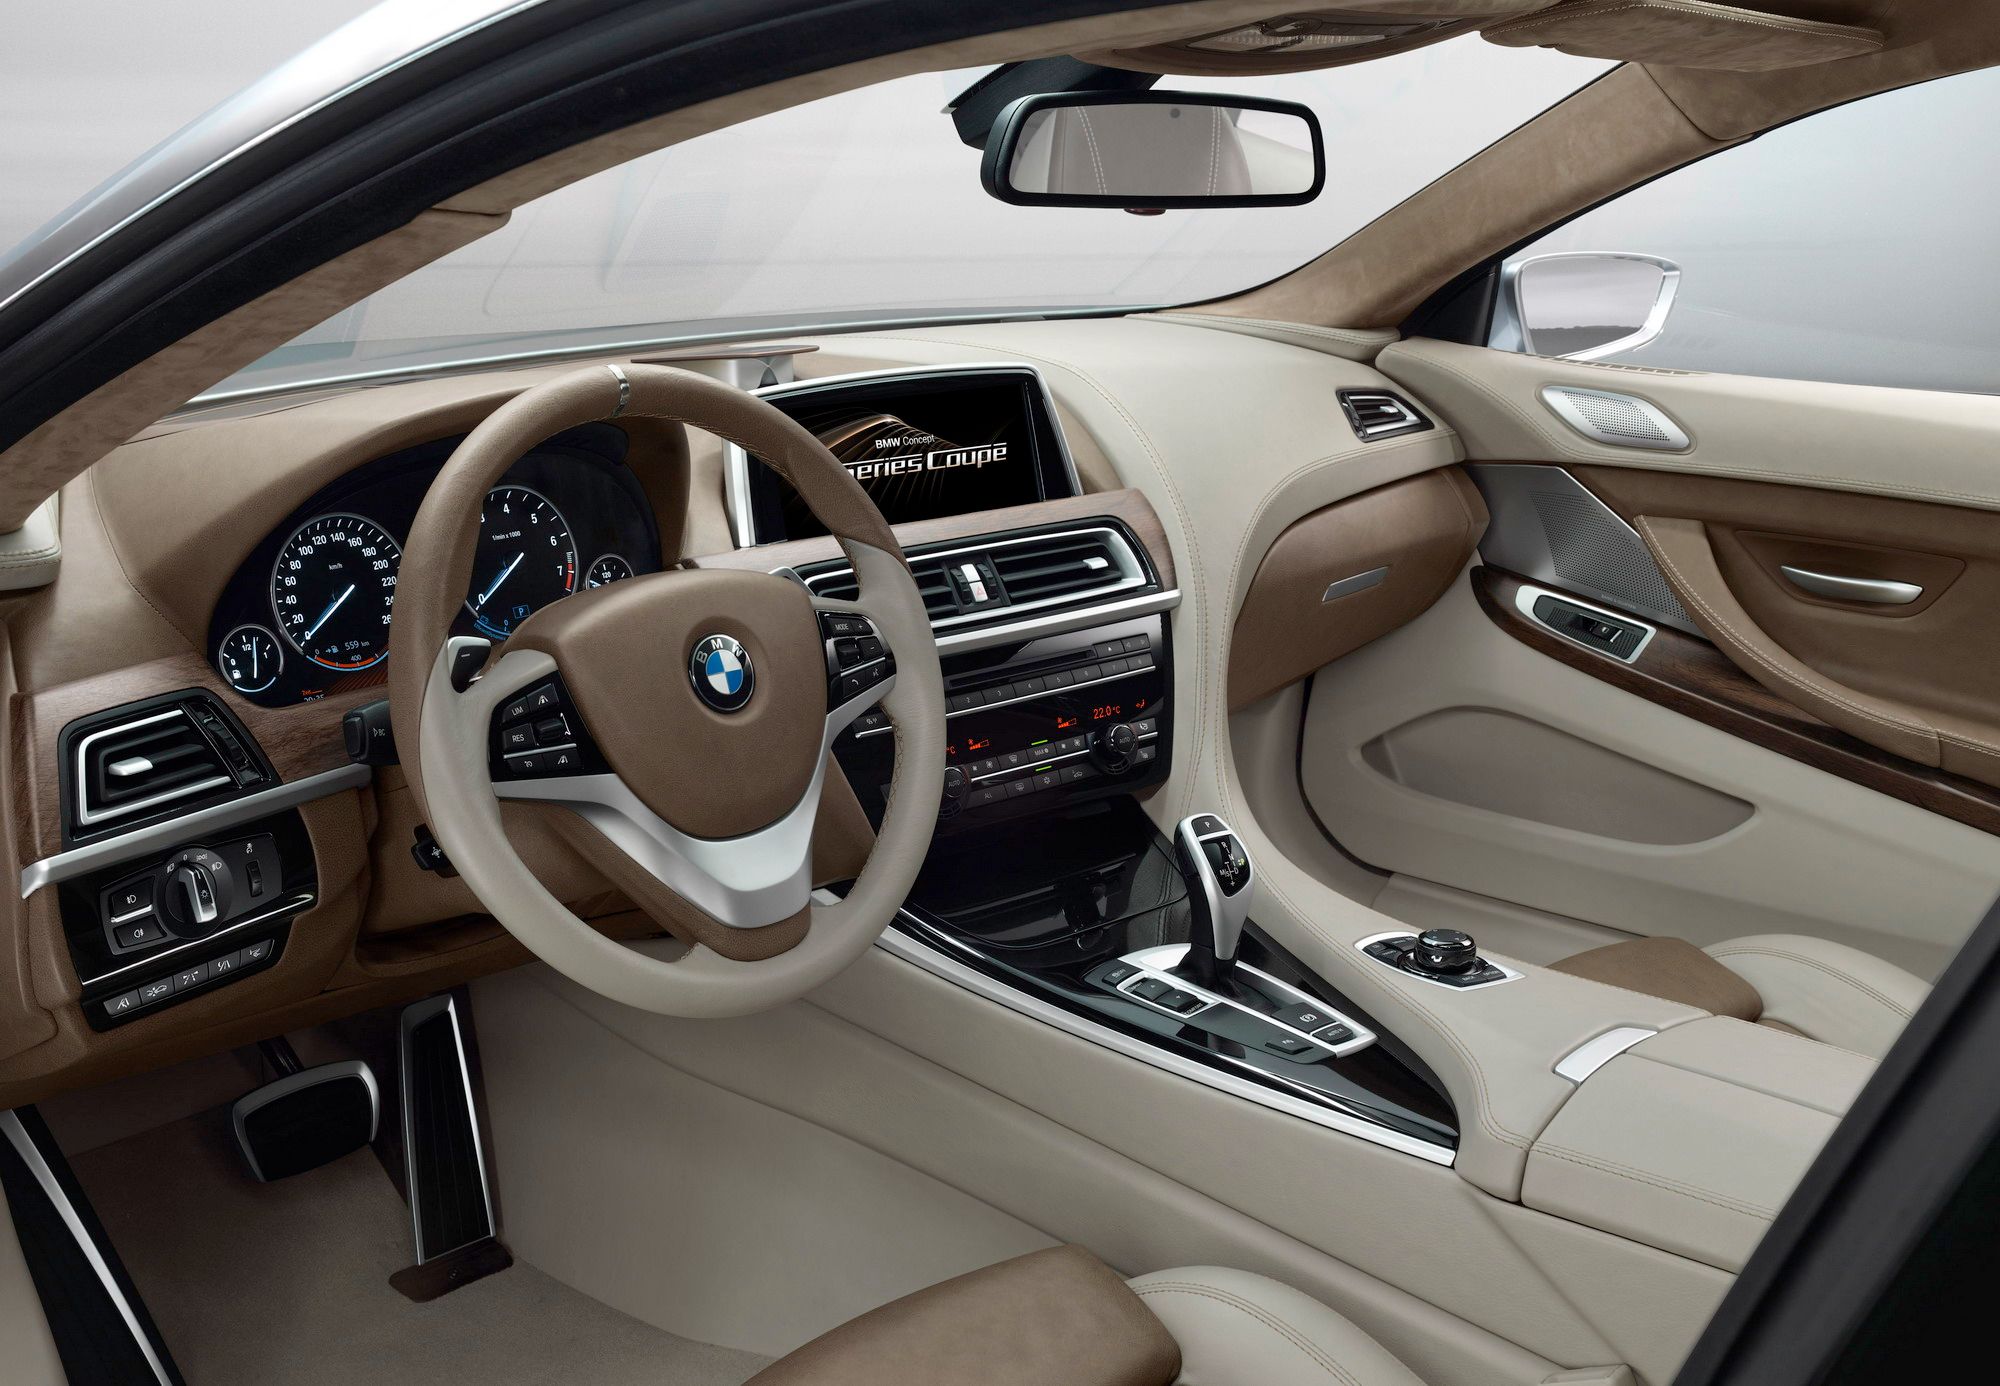 2011 BMW Concept 6-Series Coupe